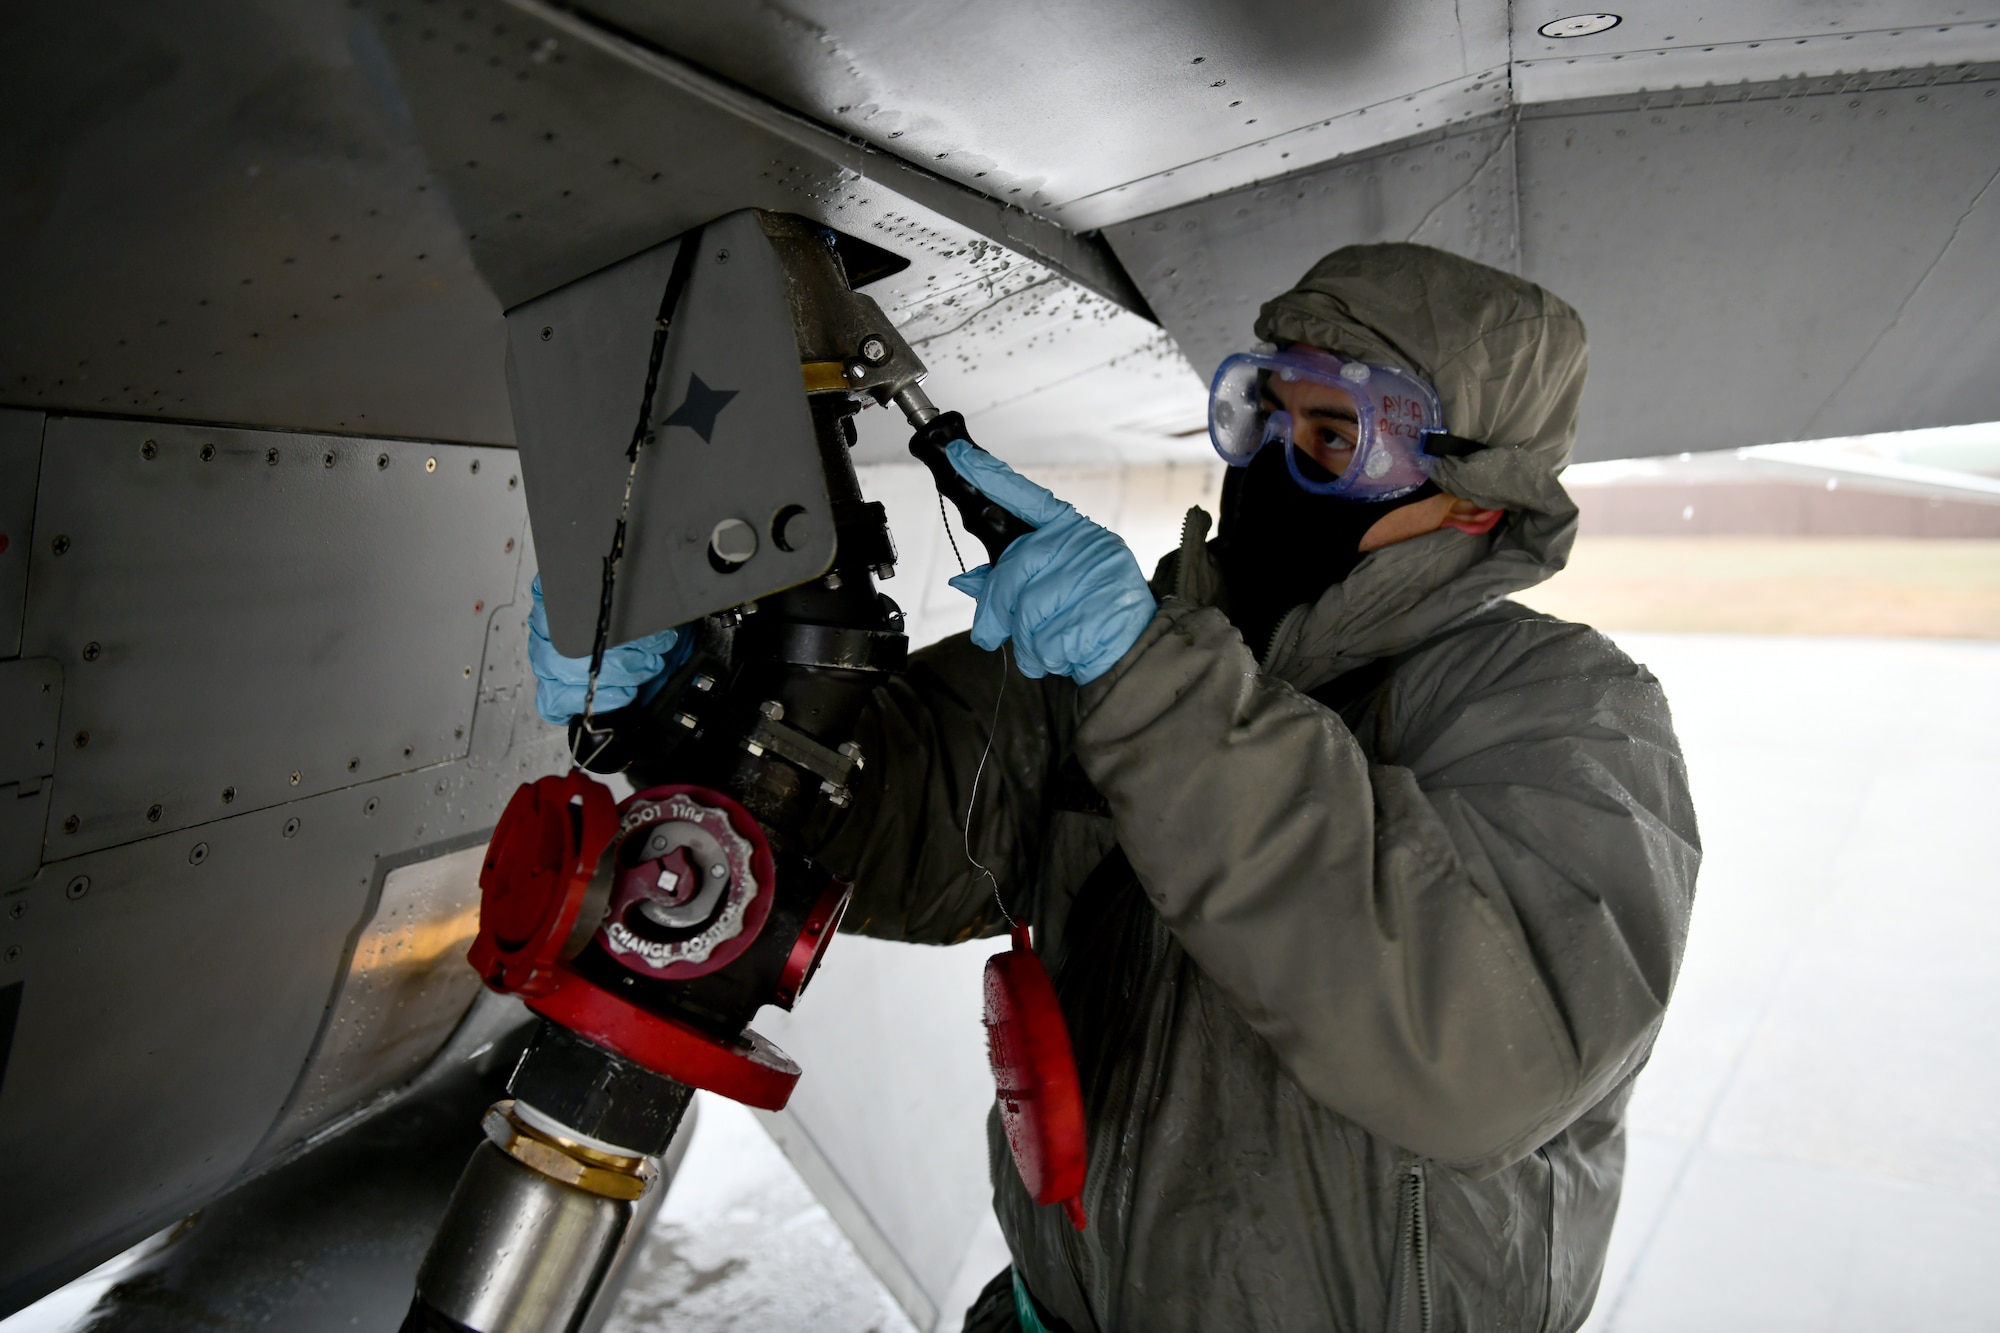 U.S. Air Force Staff Sgt. Andrew Bueno, 555th Aircraft Maintenance Unit crew chief, attaches a fueling line to an F-16 Fighting Falcon at Aviano Air Base, Italy, Dec. 2, 2020. Crew chiefs work alongside many other career fields in the Air Force to ensure the upkeep of aircraft assigned to the wing. Maintenance airmen work around the clock, often in less-than-ideal weather conditions, to keep the wing mission-ready. (U.S. Air Force photo by Staff Sgt. K. Tucker Owen)